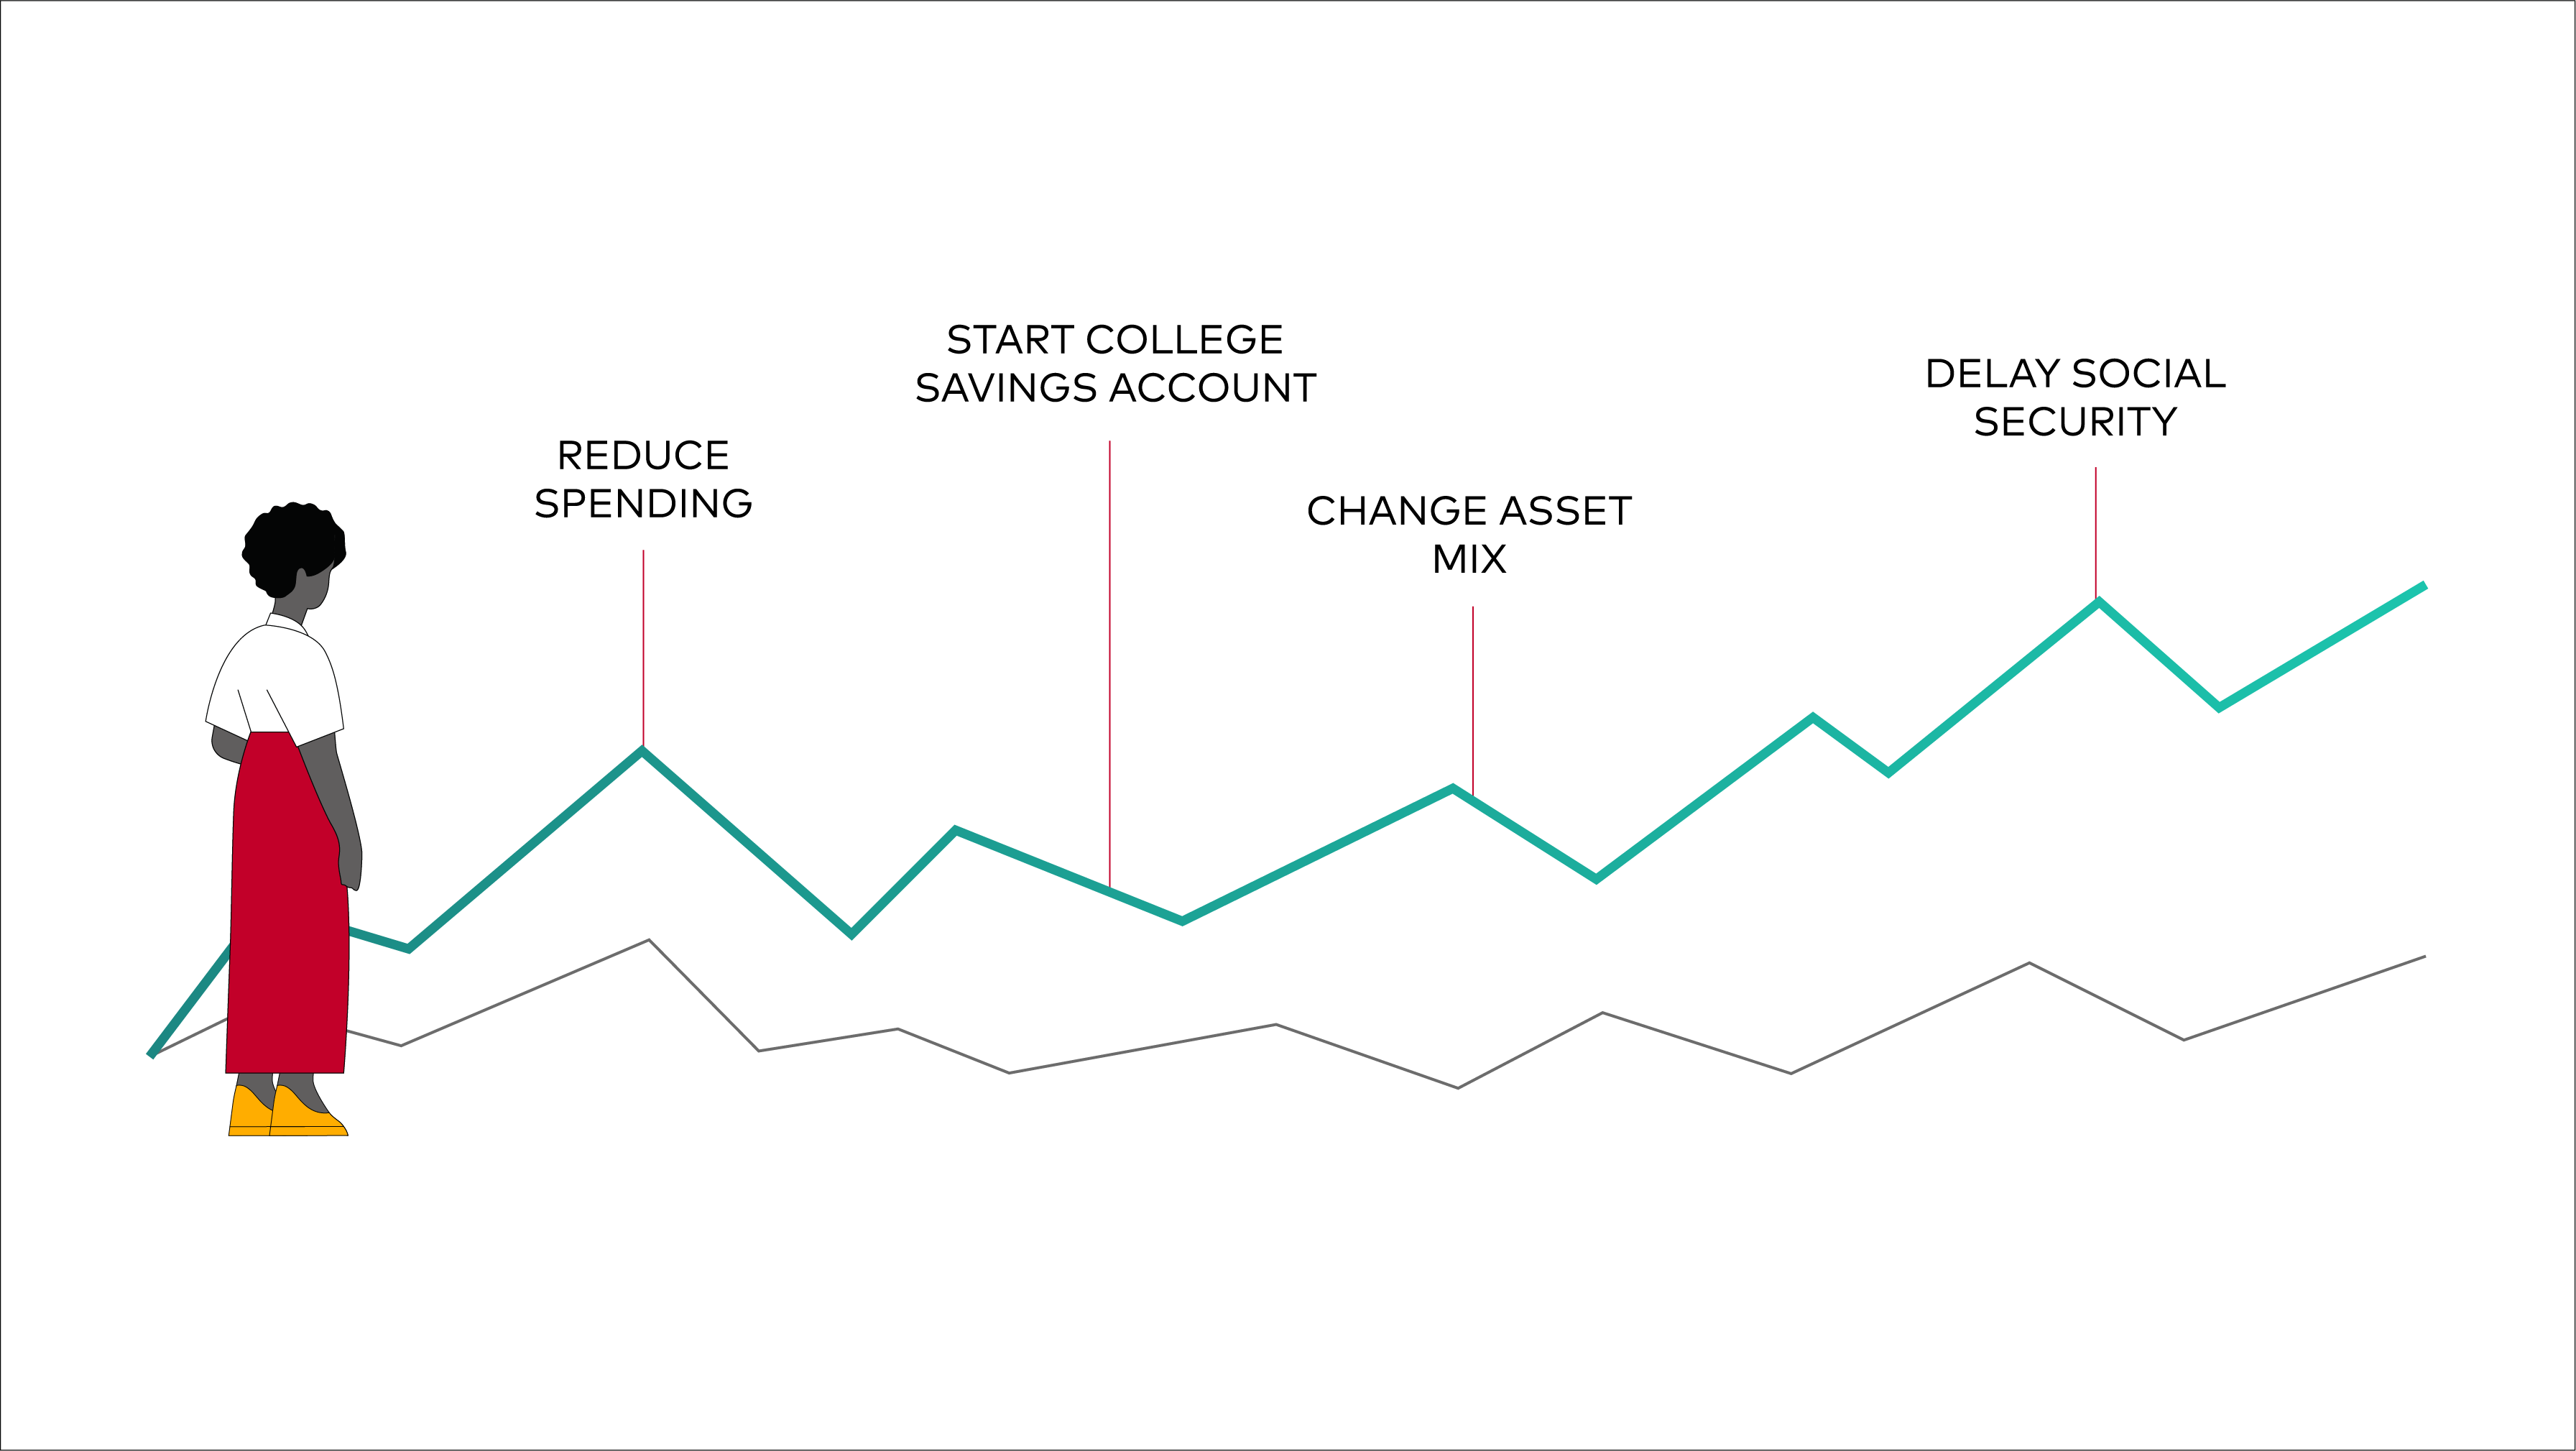 Illustration shows a person standing in front and to the left of a single line graph showing events related to financial wellness. The line fluctuates but rises steadily higher, with the events (from left to right) of reduce spending, start college savings account, change asset mix, and delay Social Security. 